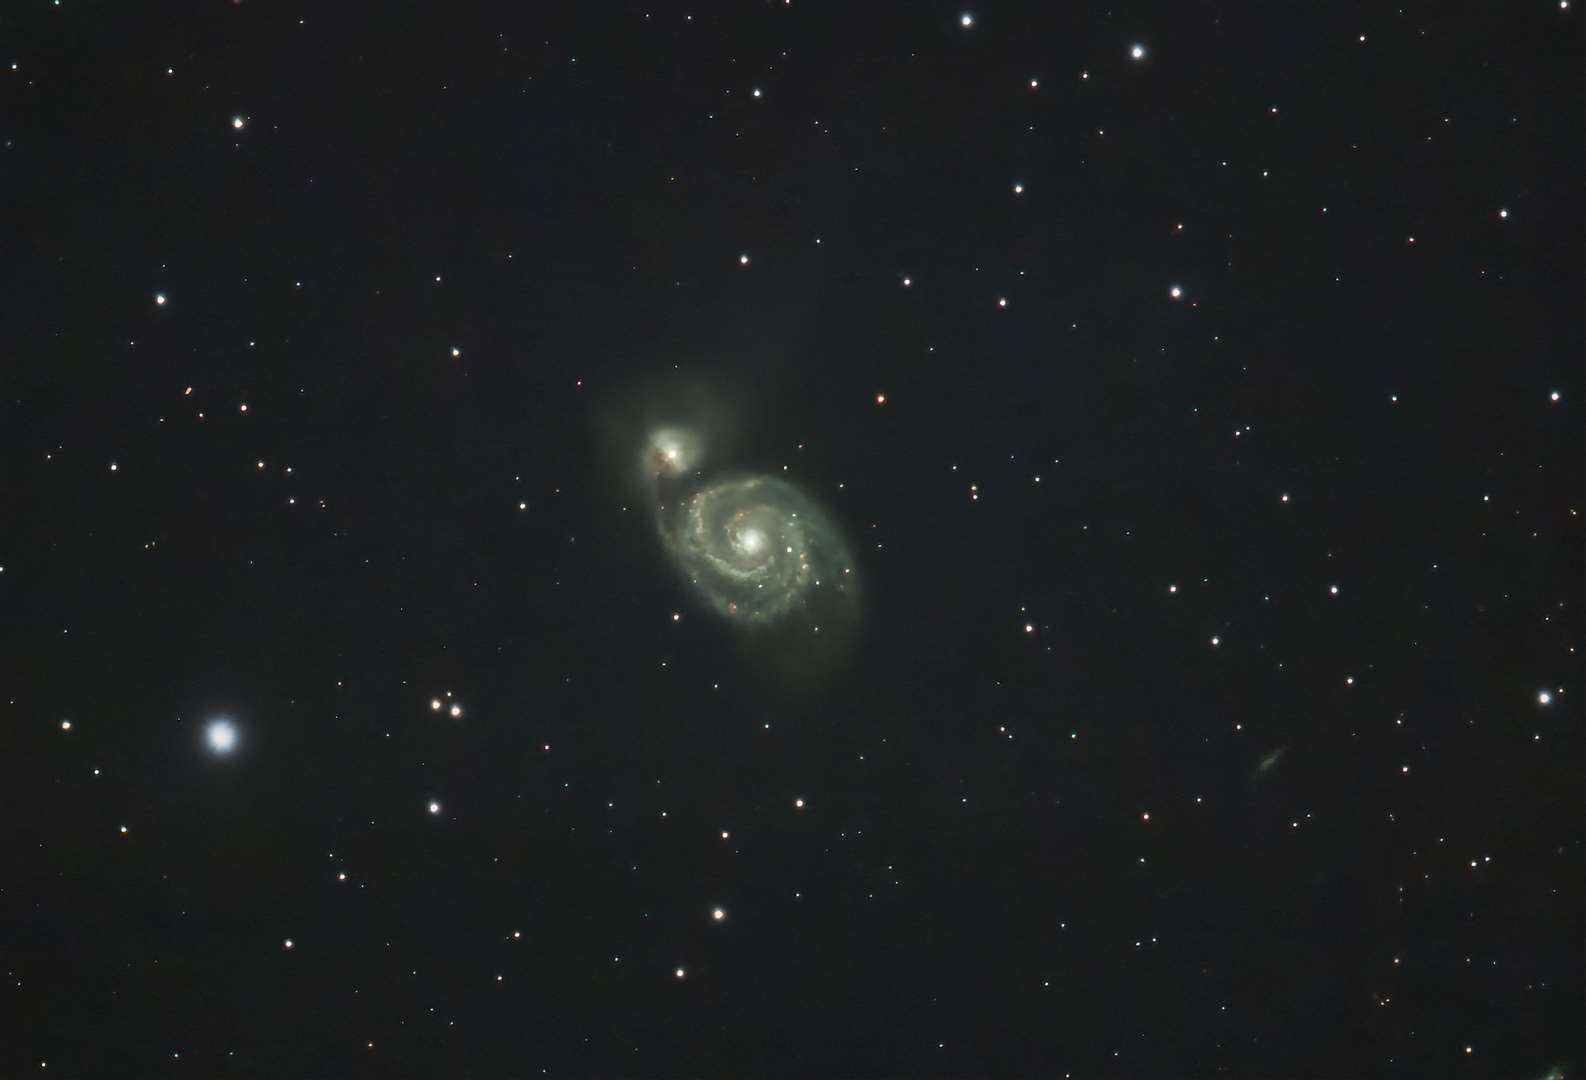 Finally moving even further out into inter-galactic space we have the Whirlpool Galaxy (M51a).The Whirlpool Galaxy is a grand spiral class galaxy and is interacting with a smaller galaxy M51b/NGC 5195.This galactic interaction is taking place 31 million light years from earth. This is a cropped image to show the interaction.